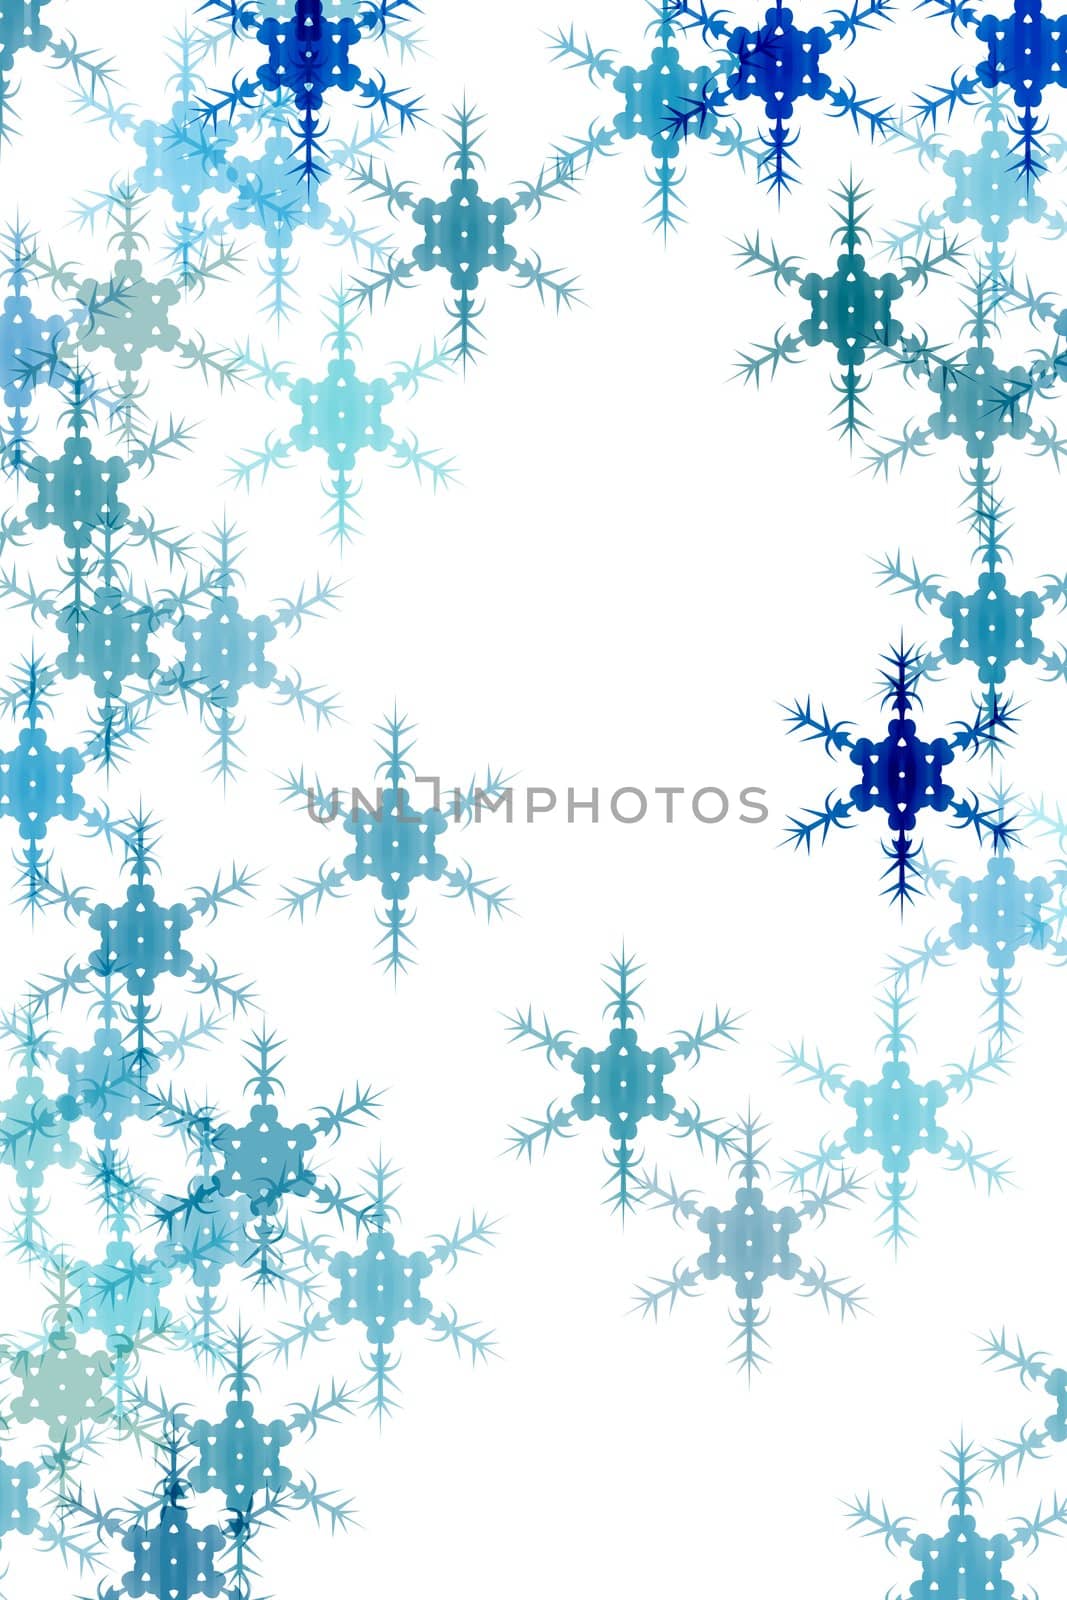 snowflakes in different blue colours on white background